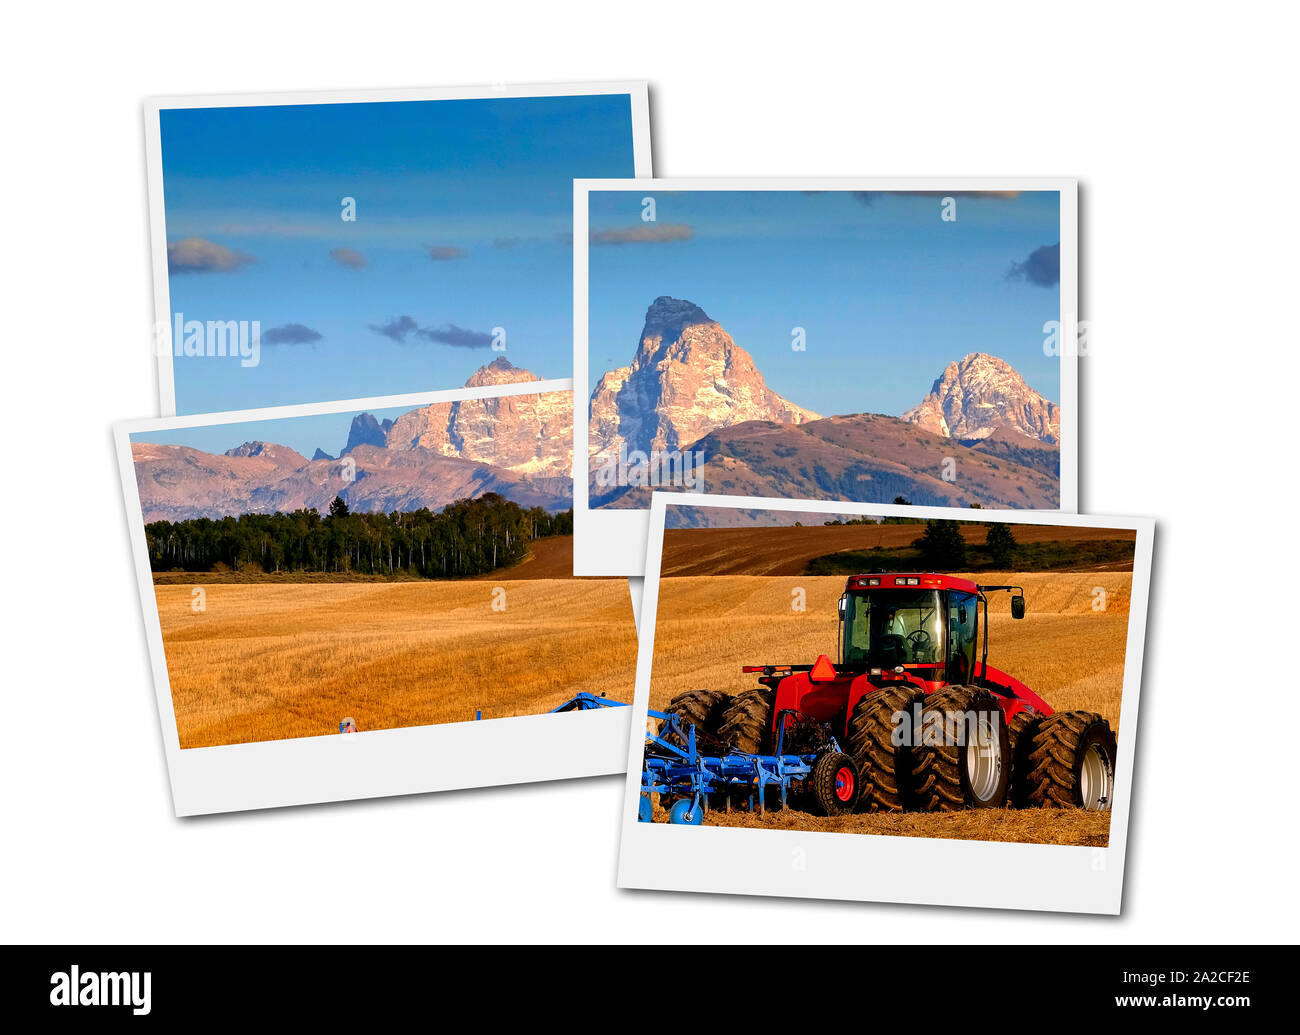 Tractor Equipment Farming Ground Harvesting crops in fall Autumn with Teton Mountains in background film frame photograph Stock Photo